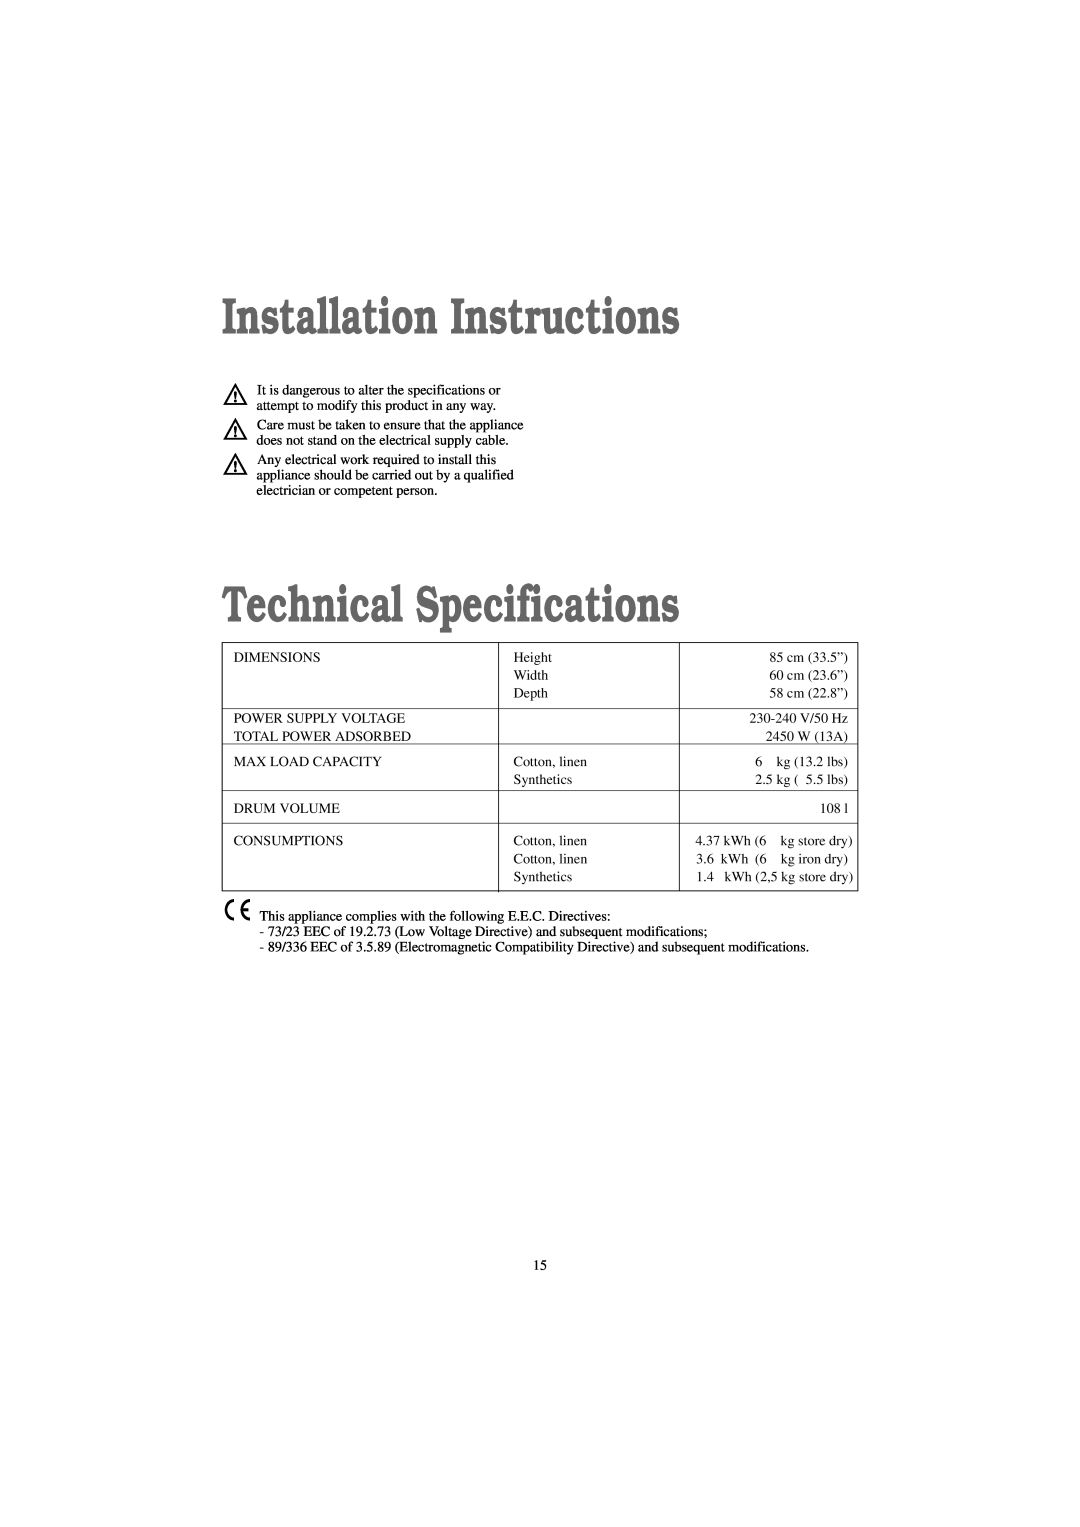 Zanussi TCE 7276 W manual Installation Instructions, Technical Specifications 